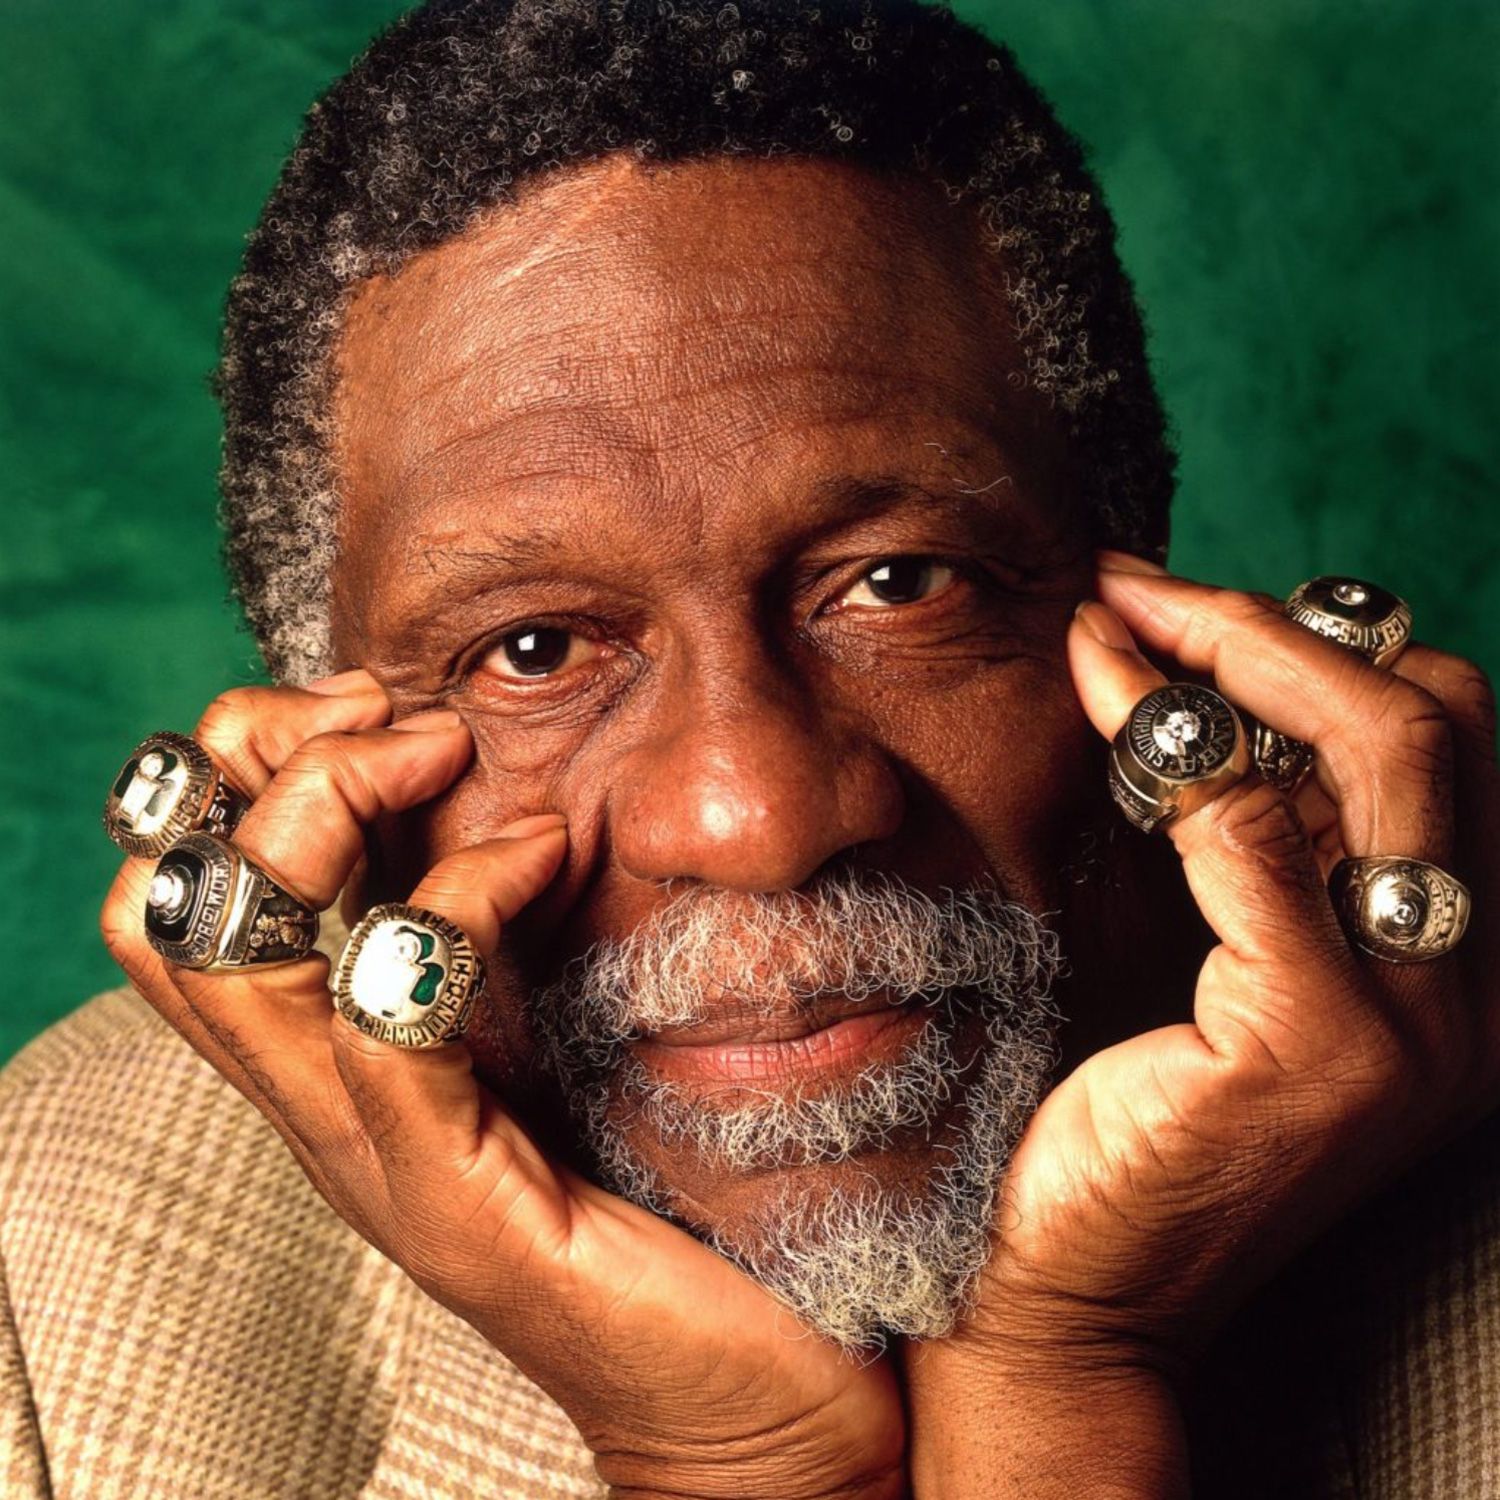 Remembering Bill Russell